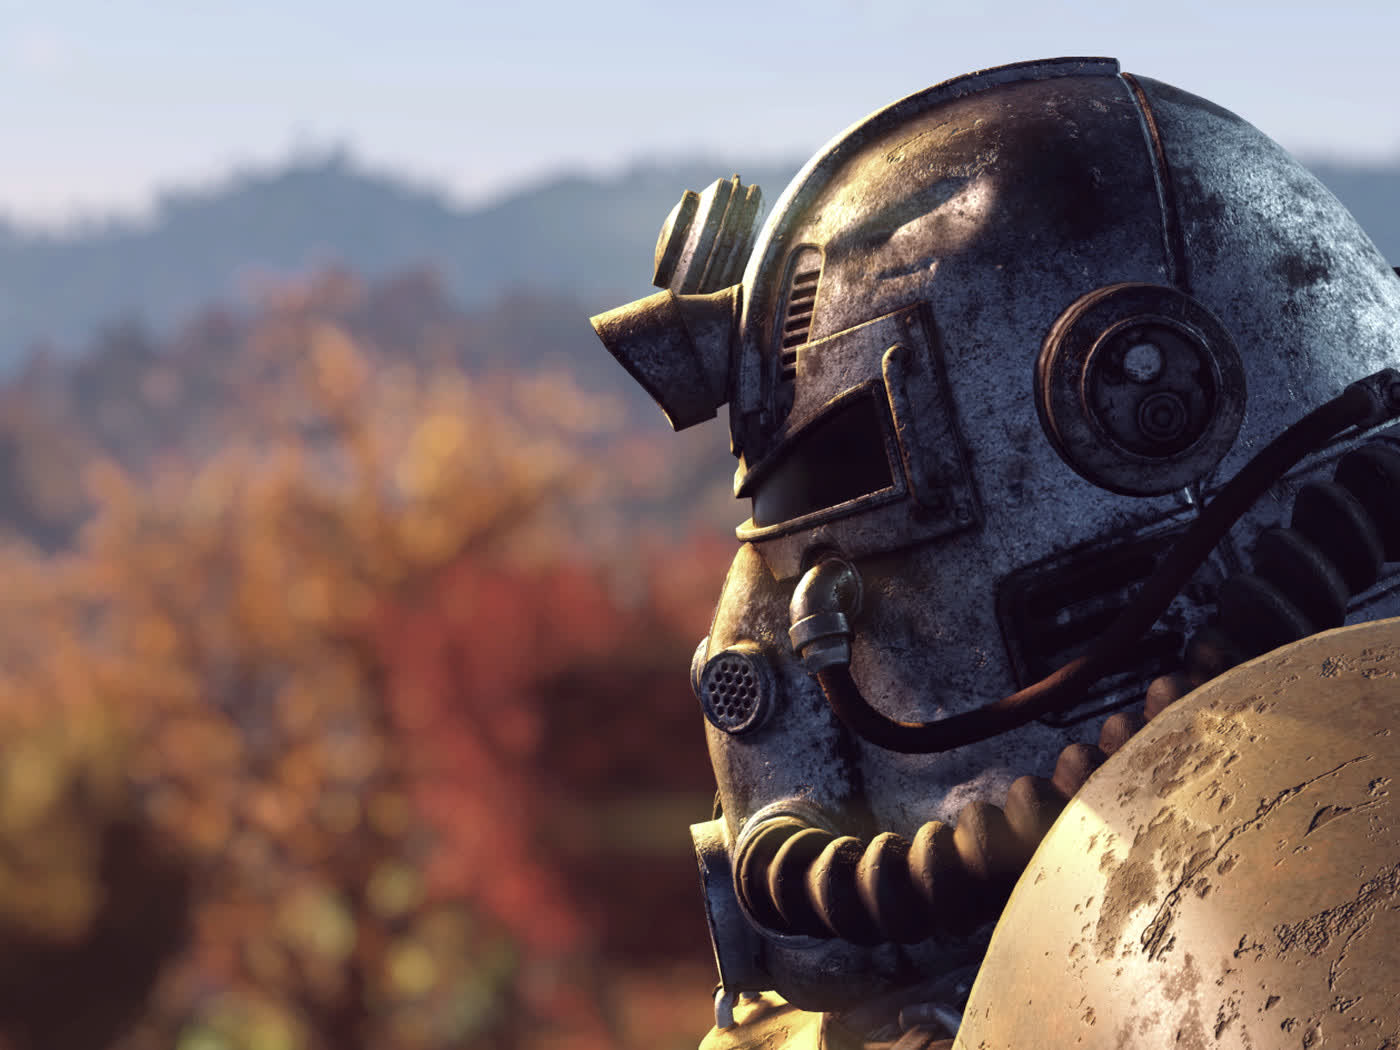 Fallout 5 is on the docket, but it'll come after The Elder Scrolls VI